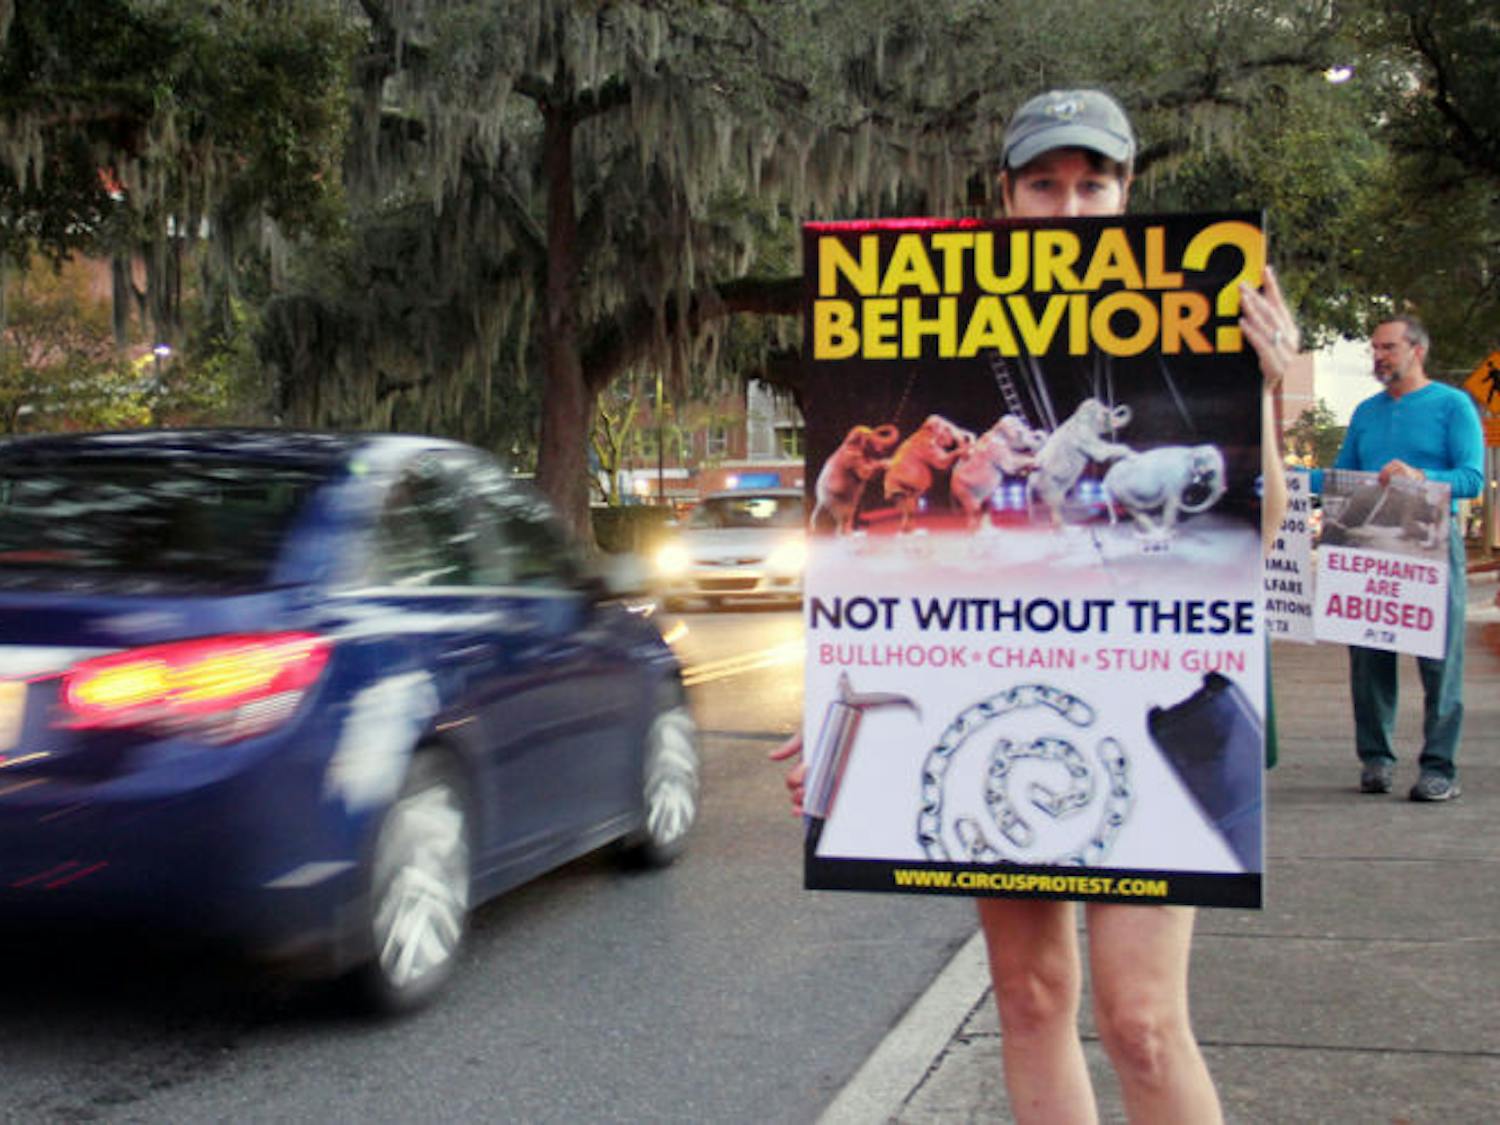 A protester stands on the corner of West University Avenue and Gale Lemerand Drive on Friday in objection to weekend The Ringling Bros. Circus appearance in Gainesville. Protesters gathered with signs to voice their opinions on the circus’s treatment of its animals.